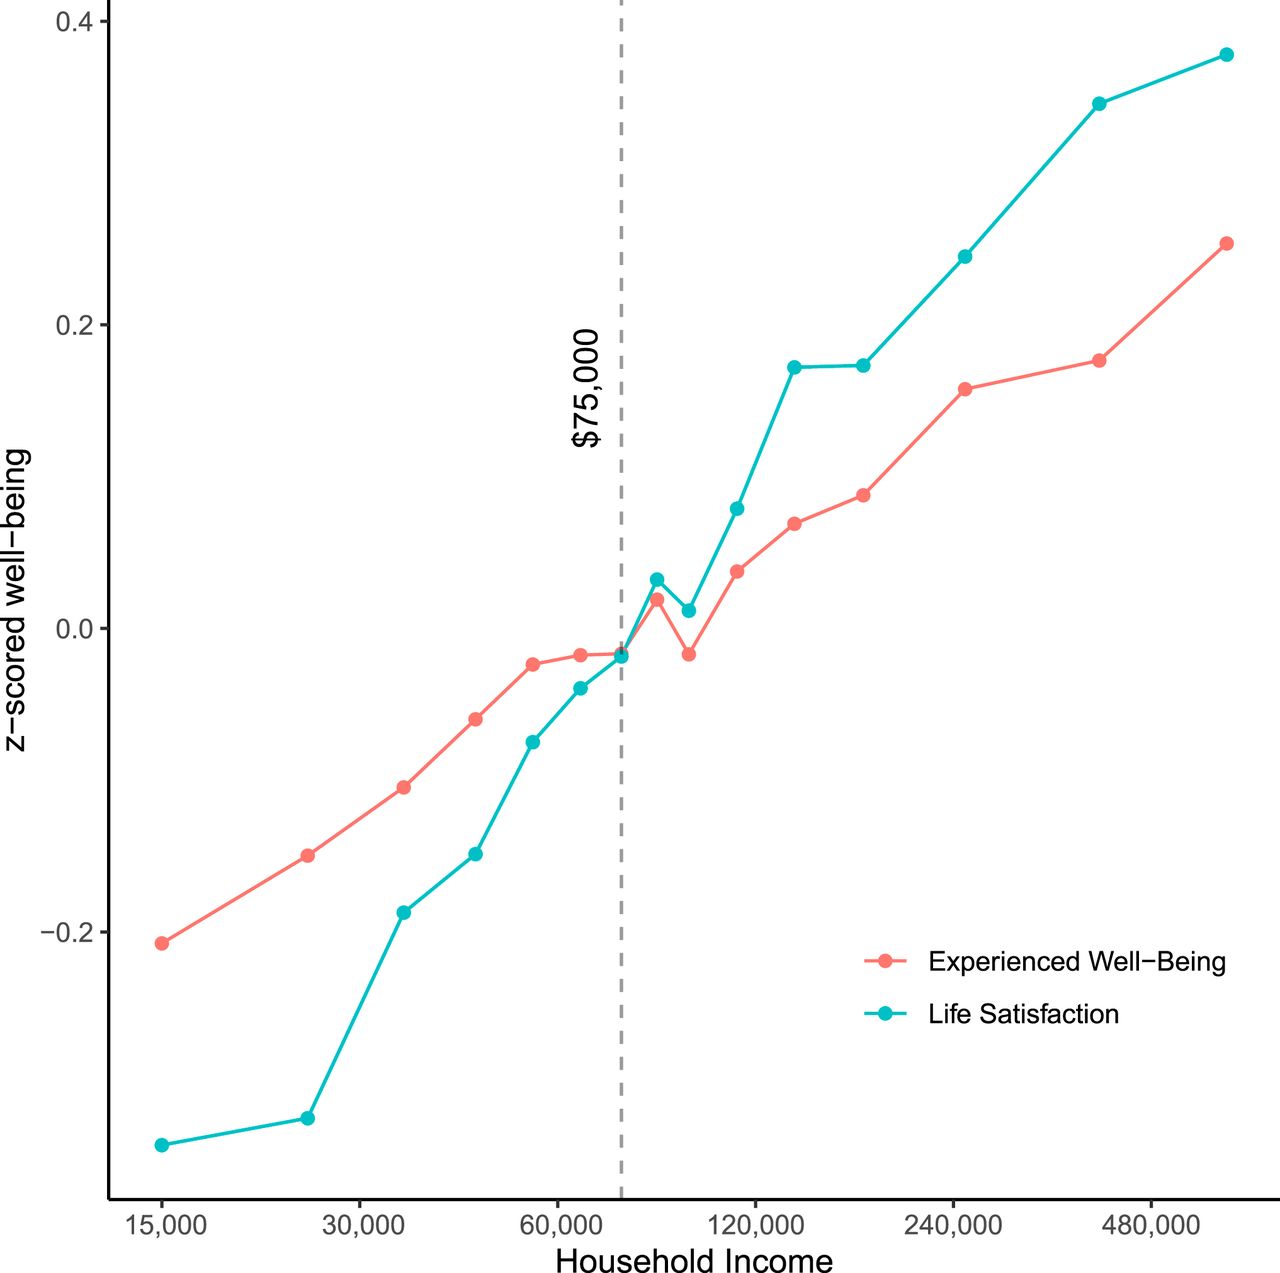 Mean levels of well-being (real-time feeling) and evaluative life satisfaction by income